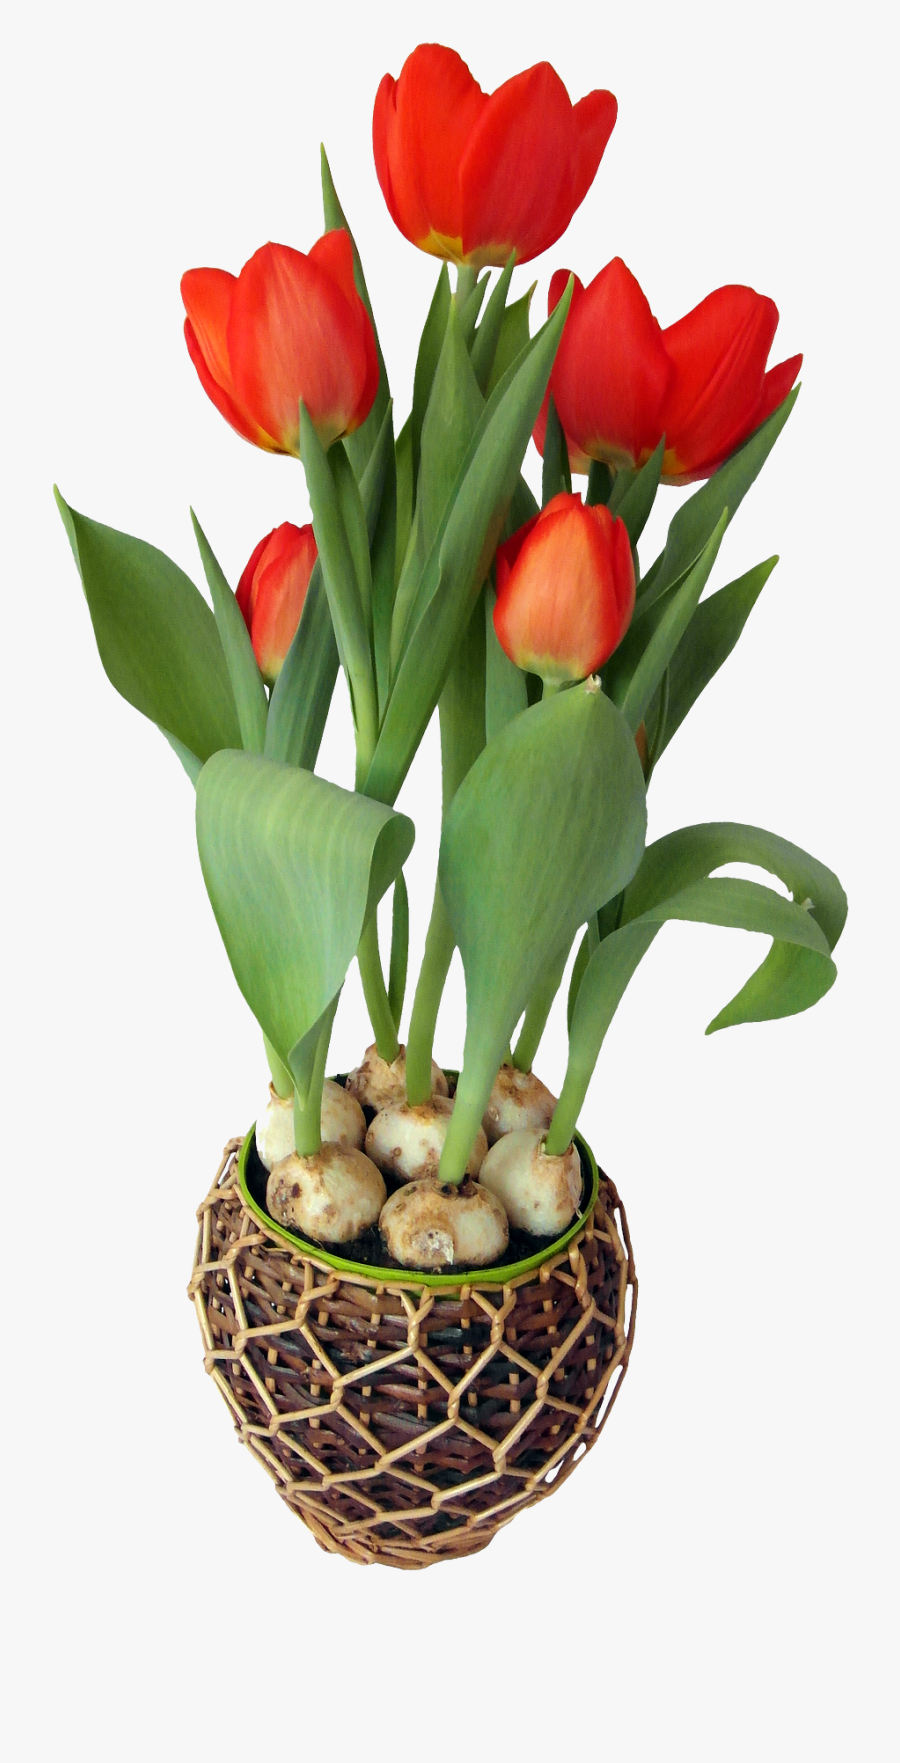 Tulip Flower In Pot - Flower In A Pot Png, Transparent Clipart